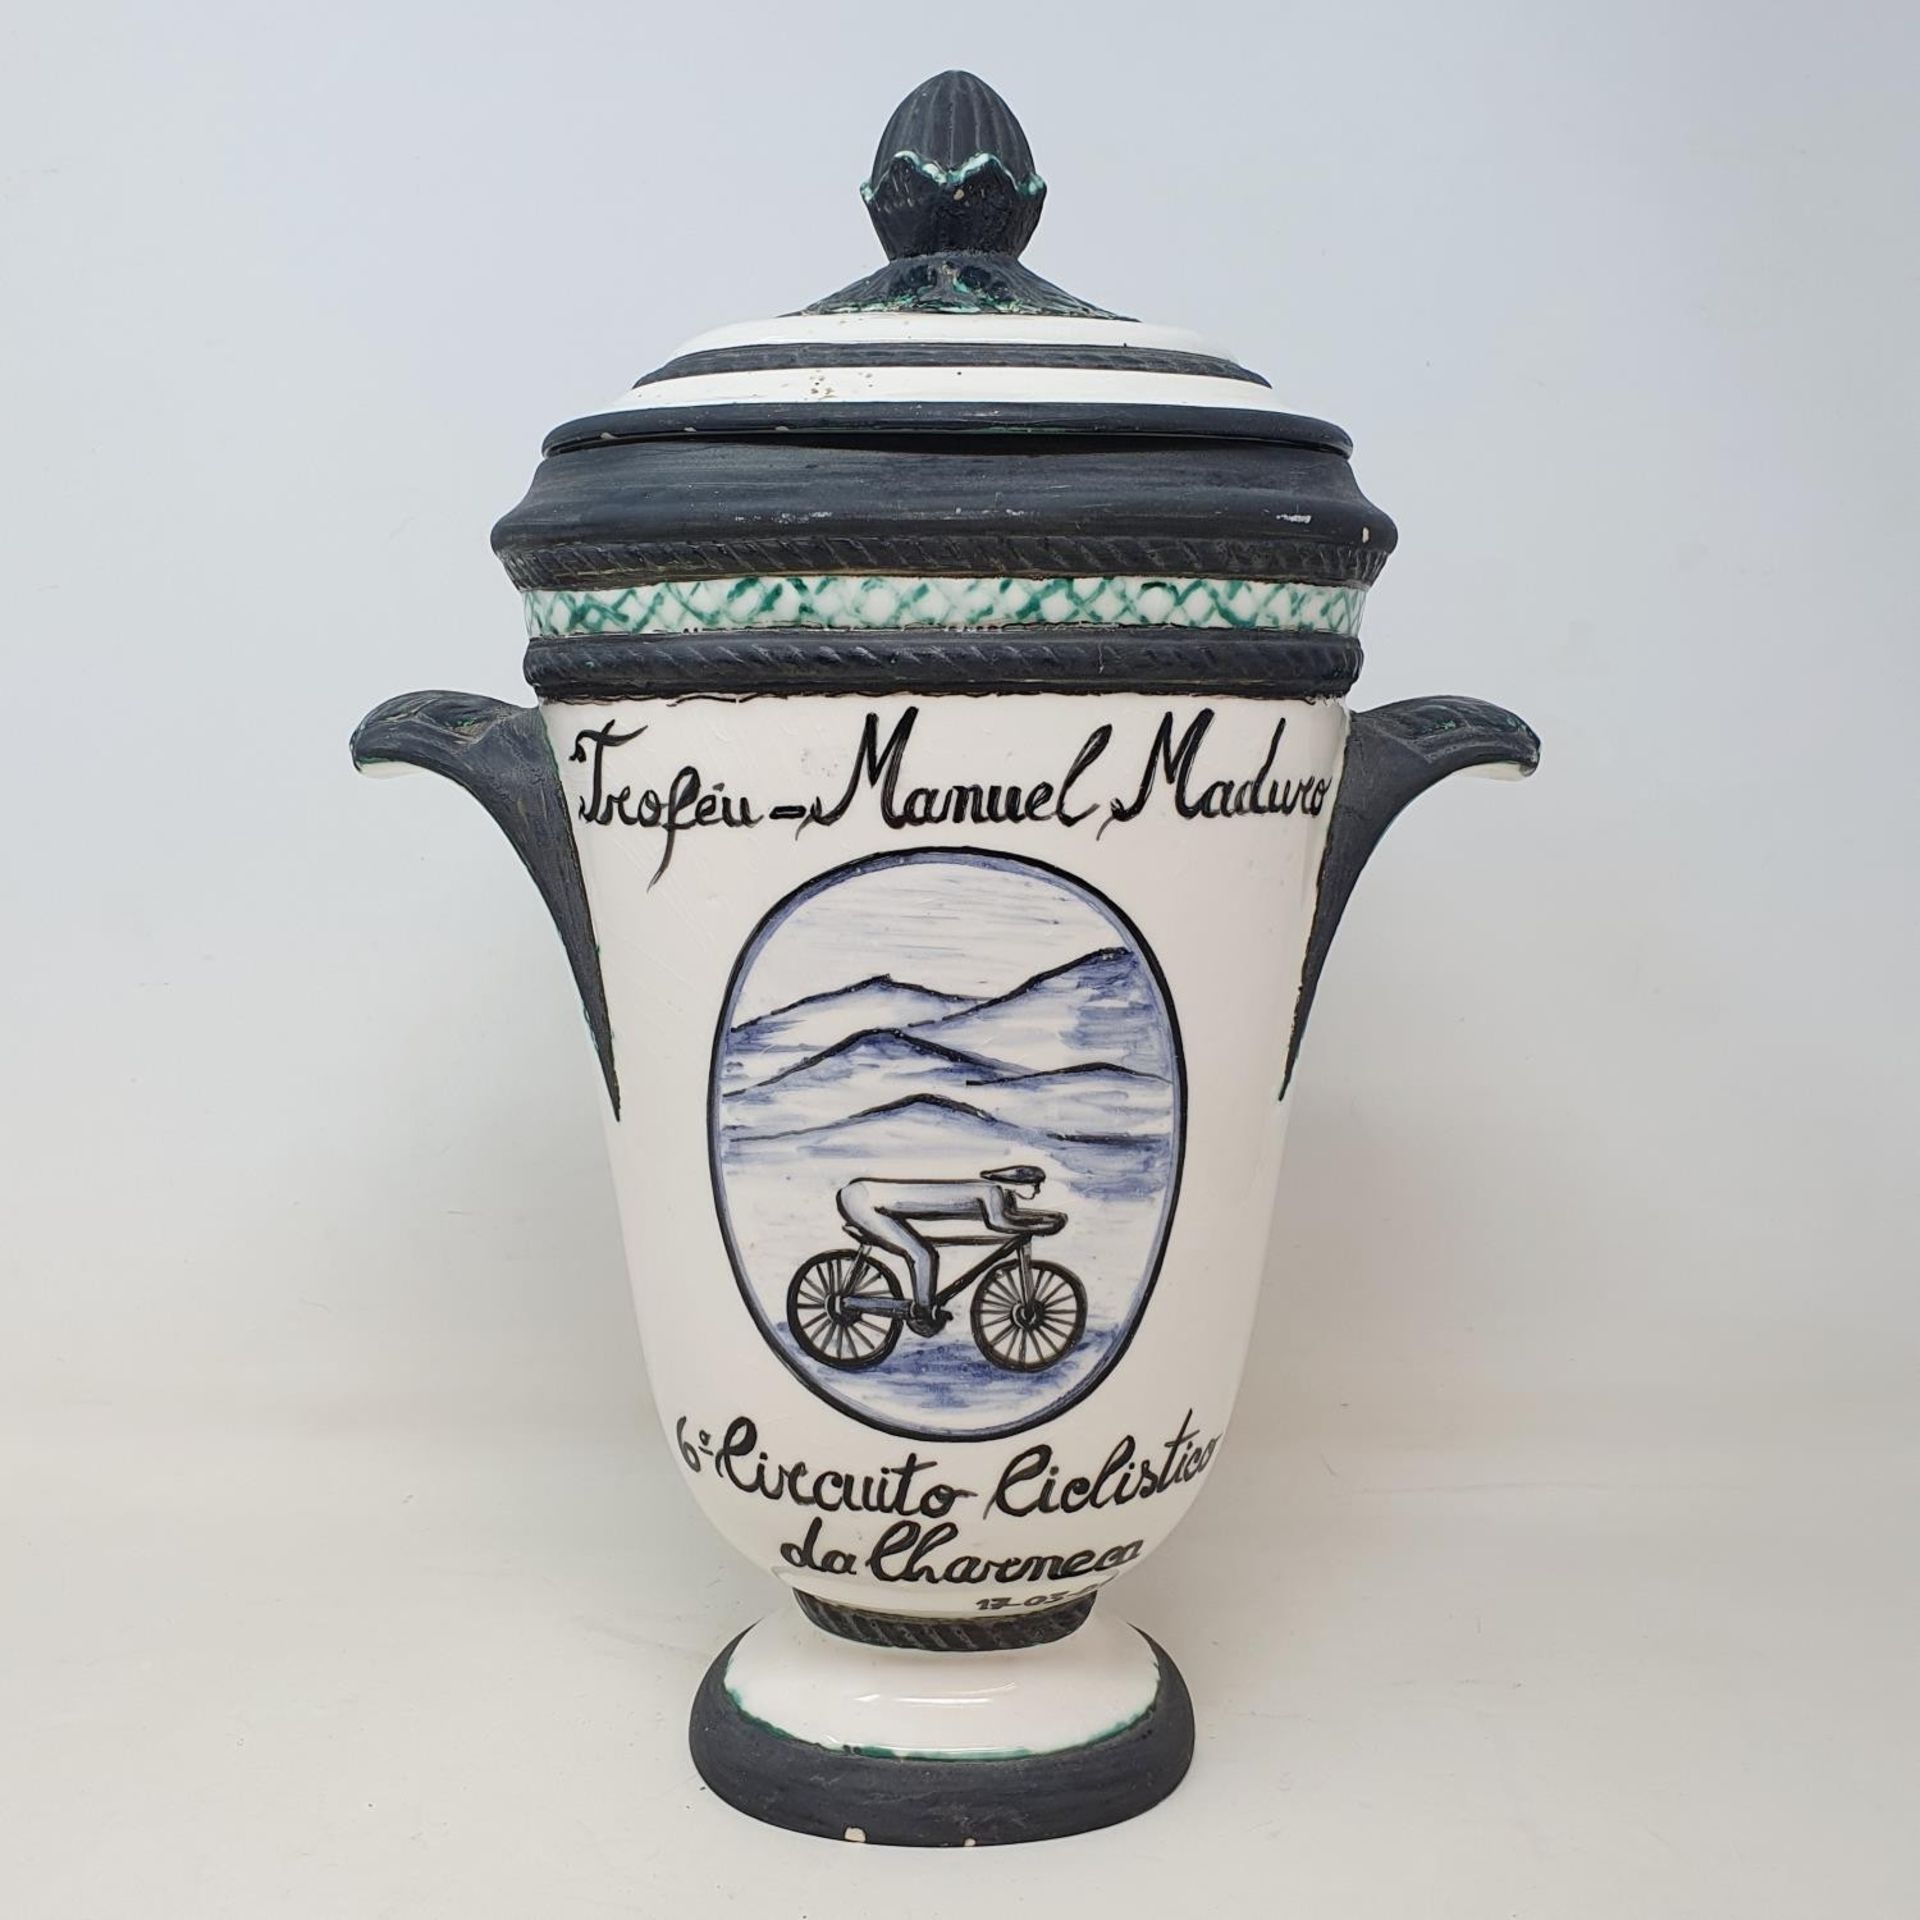 An Italian porcelain cycling trophy, 36 cm high, and a resin Hill Climb trophy in the form of a